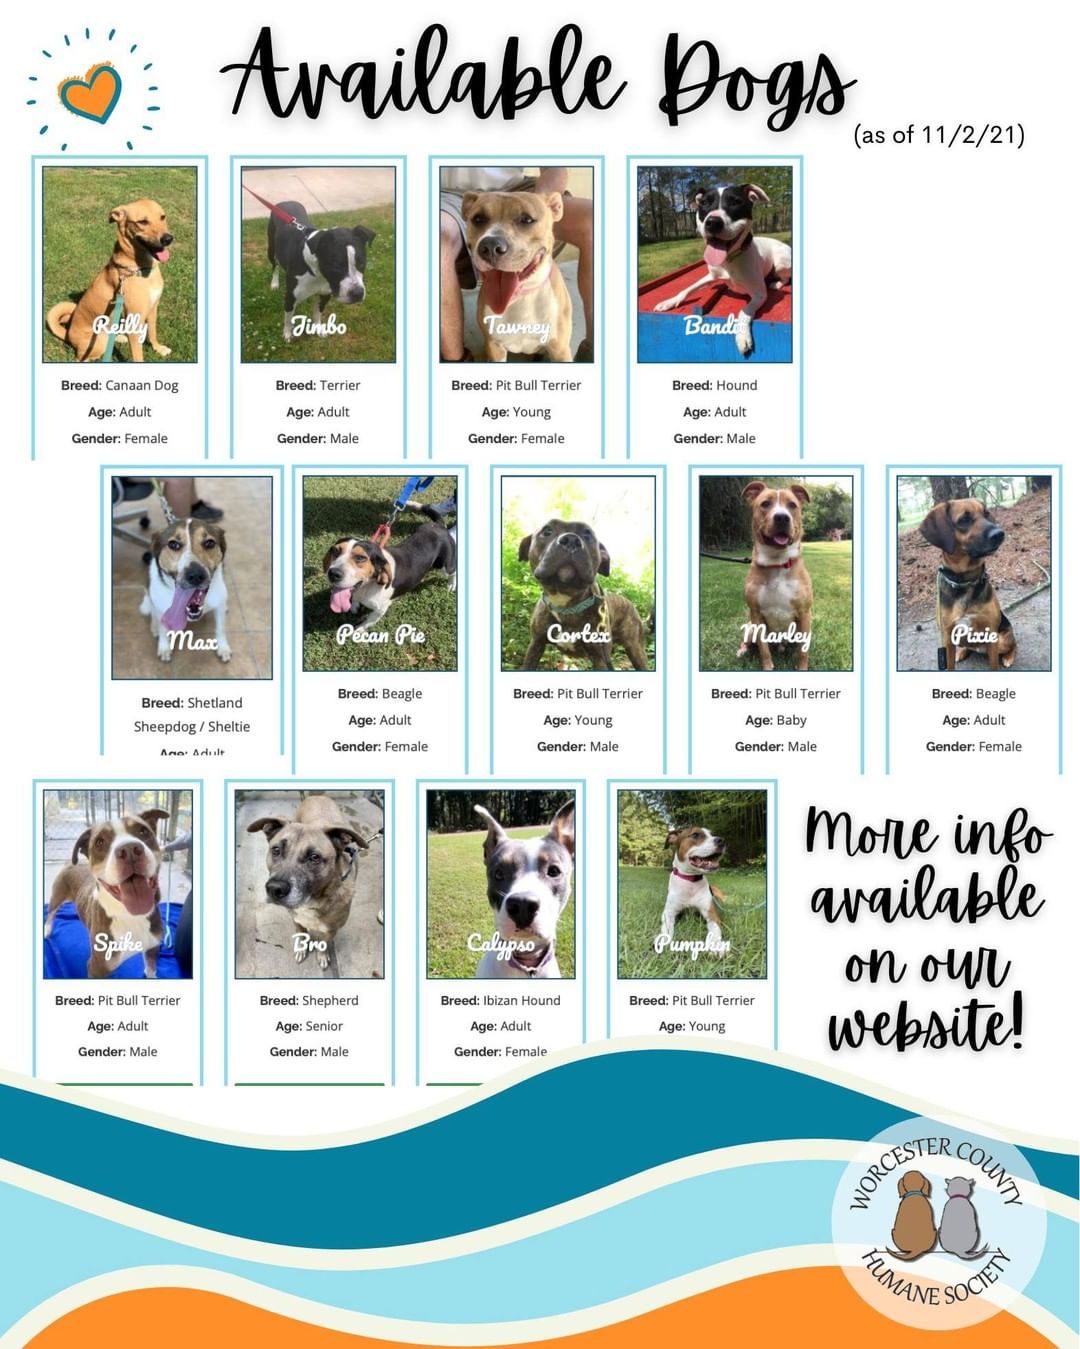 Just in case you or someone you know is looking...
We have lots of new family members waiting. ❤️

<a target='_blank' href='https://www.instagram.com/explore/tags/adoptatthebeach/'>#adoptatthebeach</a> <a target='_blank' href='https://www.instagram.com/explore/tags/dogsofoc/'>#dogsofoc</a> <a target='_blank' href='https://www.instagram.com/explore/tags/nokillshelter/'>#nokillshelter</a> <a target='_blank' href='https://www.instagram.com/explore/tags/wecouldntdoitwithoutyou/'>#wecouldntdoitwithoutyou</a>